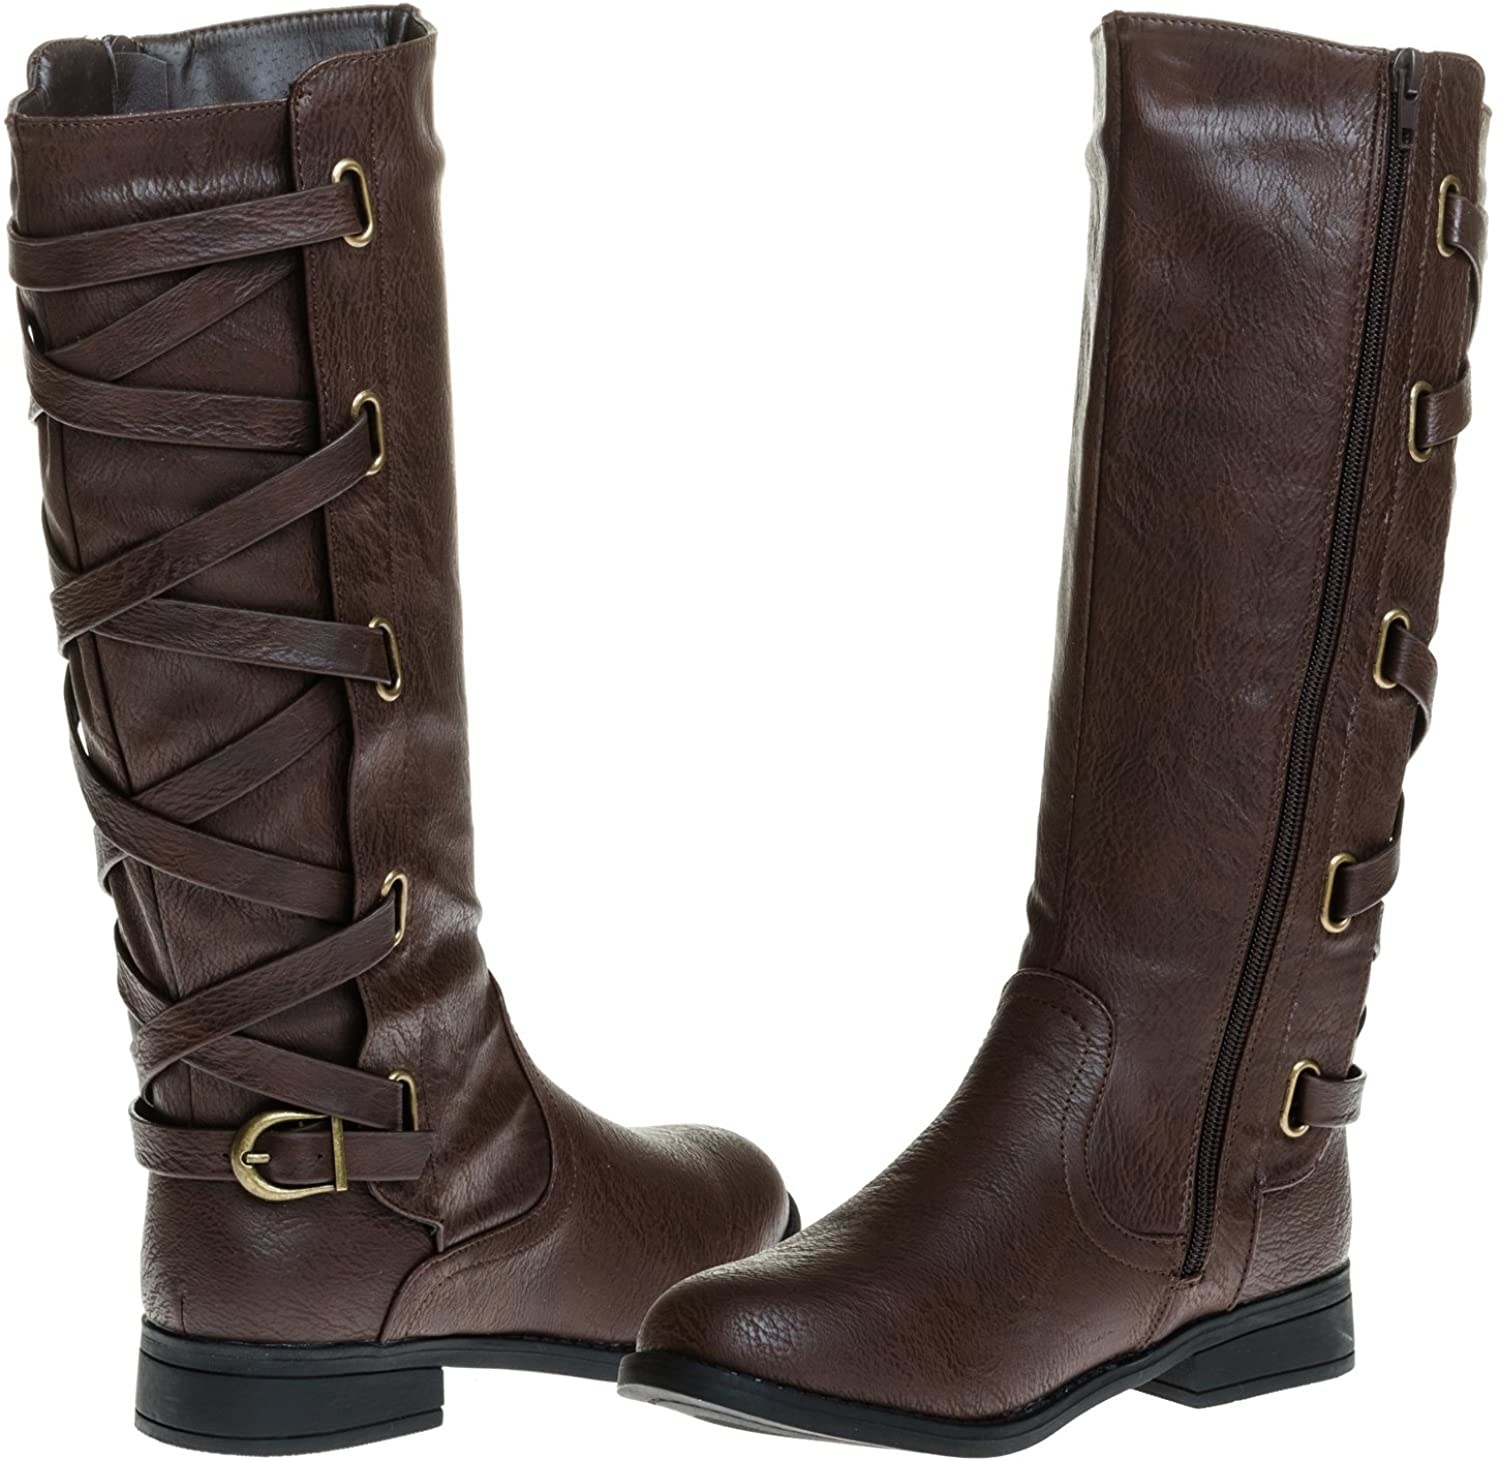 dark brown riding boots with the lace-up detailing and buckle in the back